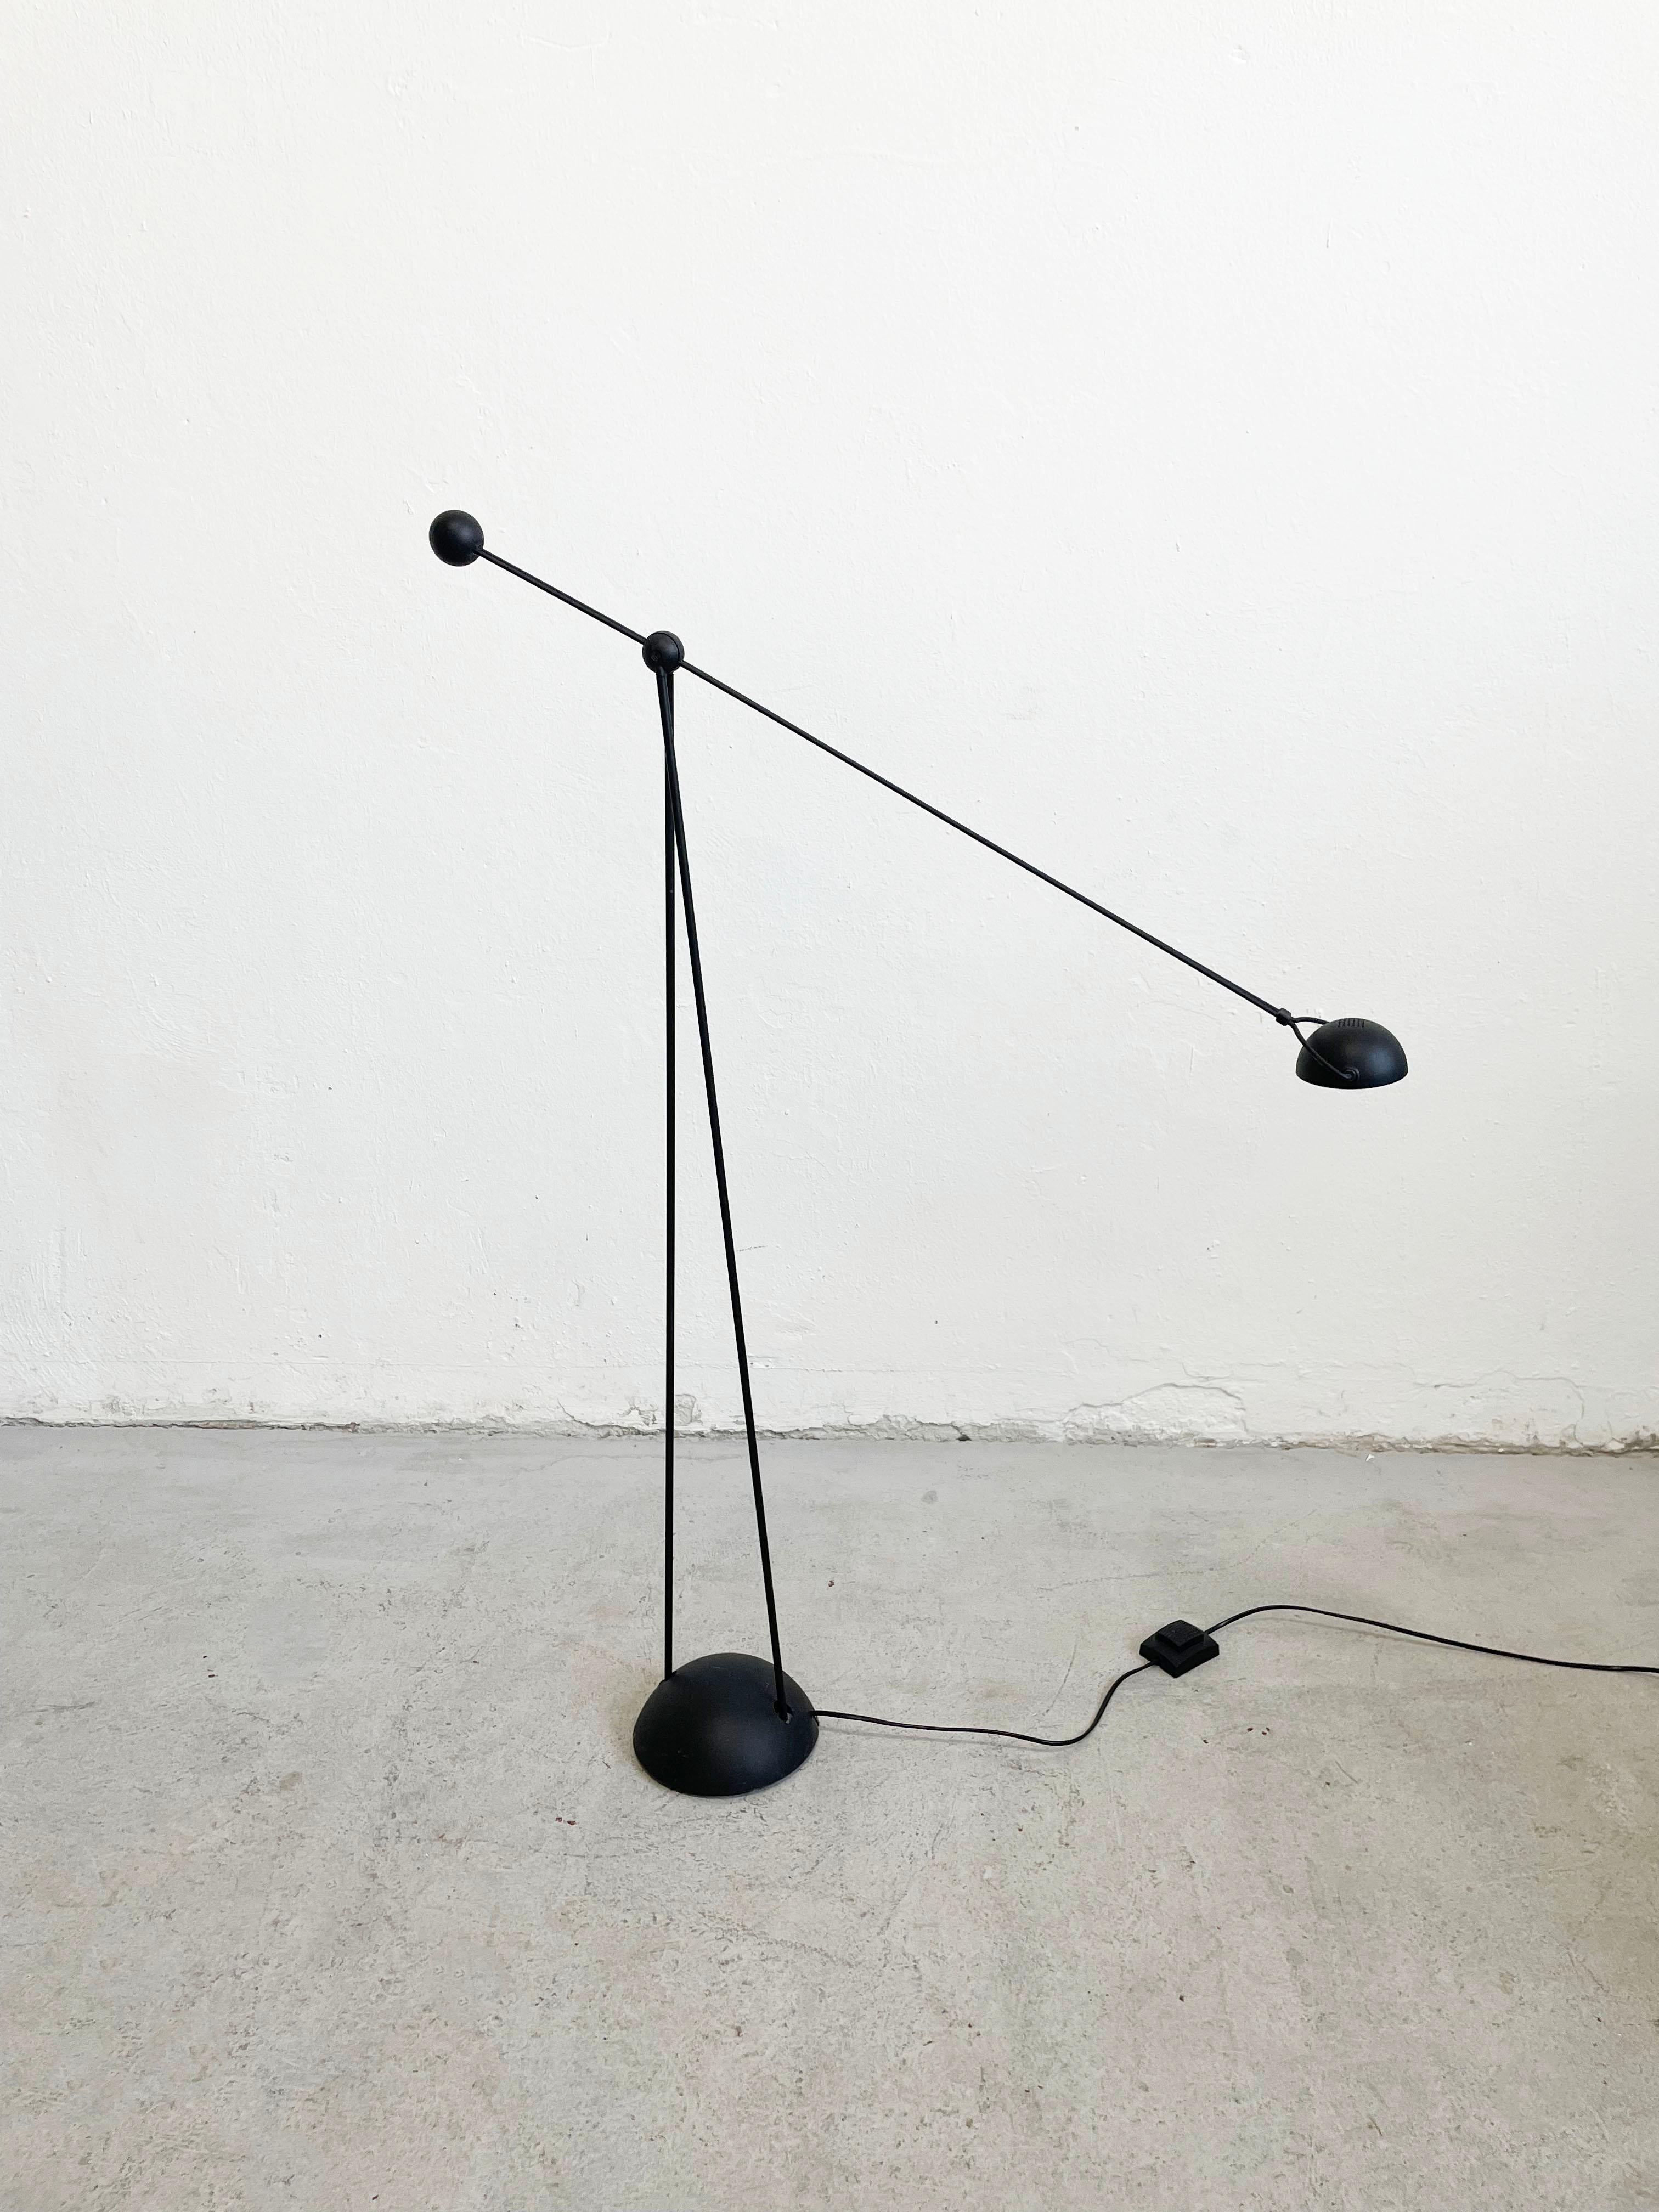 Vintage post modern halogen floor lamp model Yuki produced in the 1980s by Stefano Cevoli.
Design by Paolo Francesco Piva.

Heavy hemispherical base in black painted metal on the bottom side has a producer's stamp.
Double stem in black painted metal